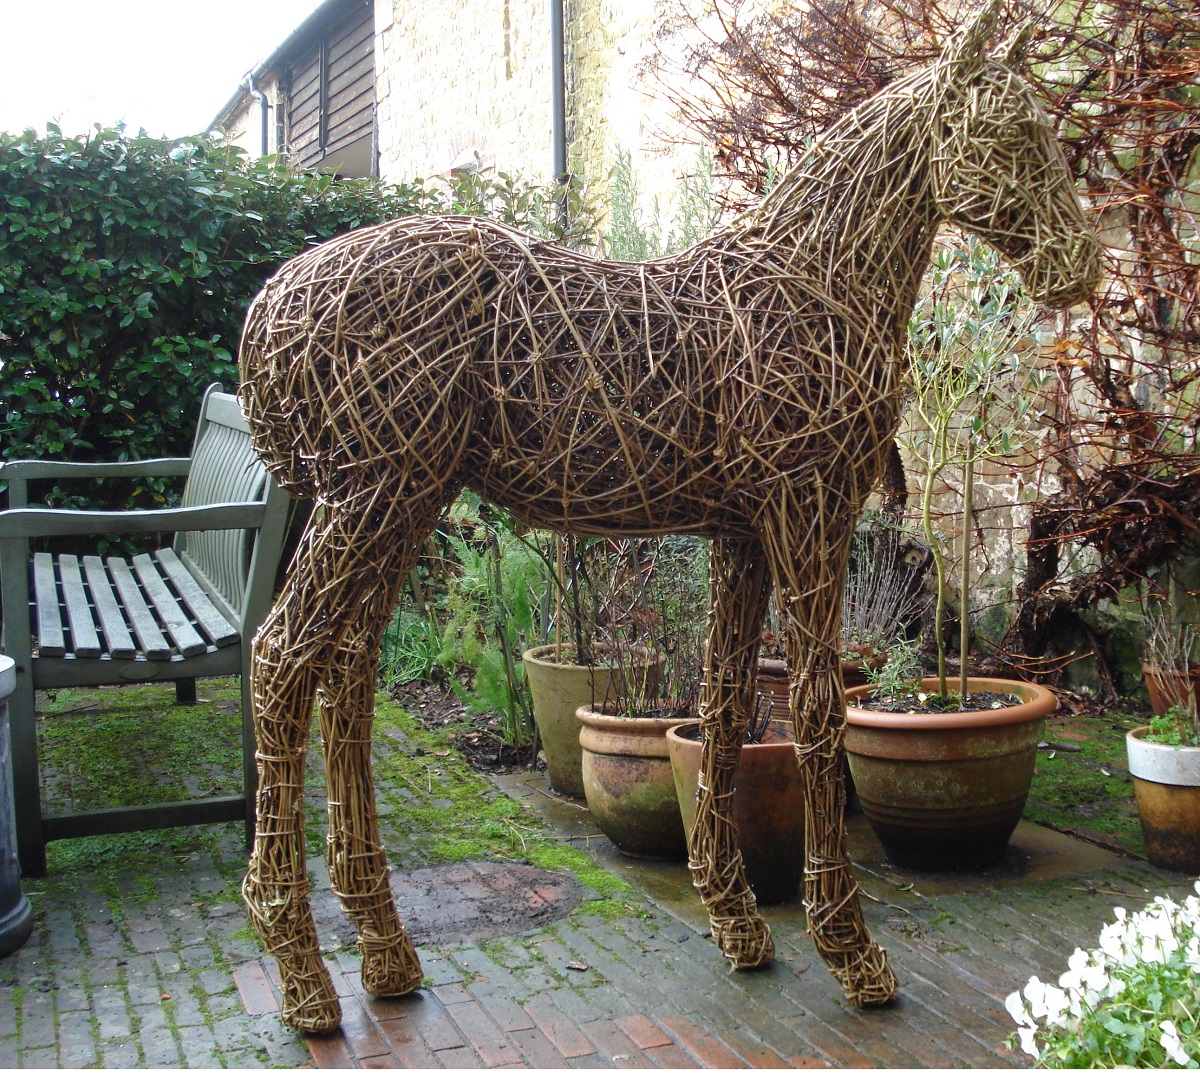 Foal, a life size sculpture in willow and steel.